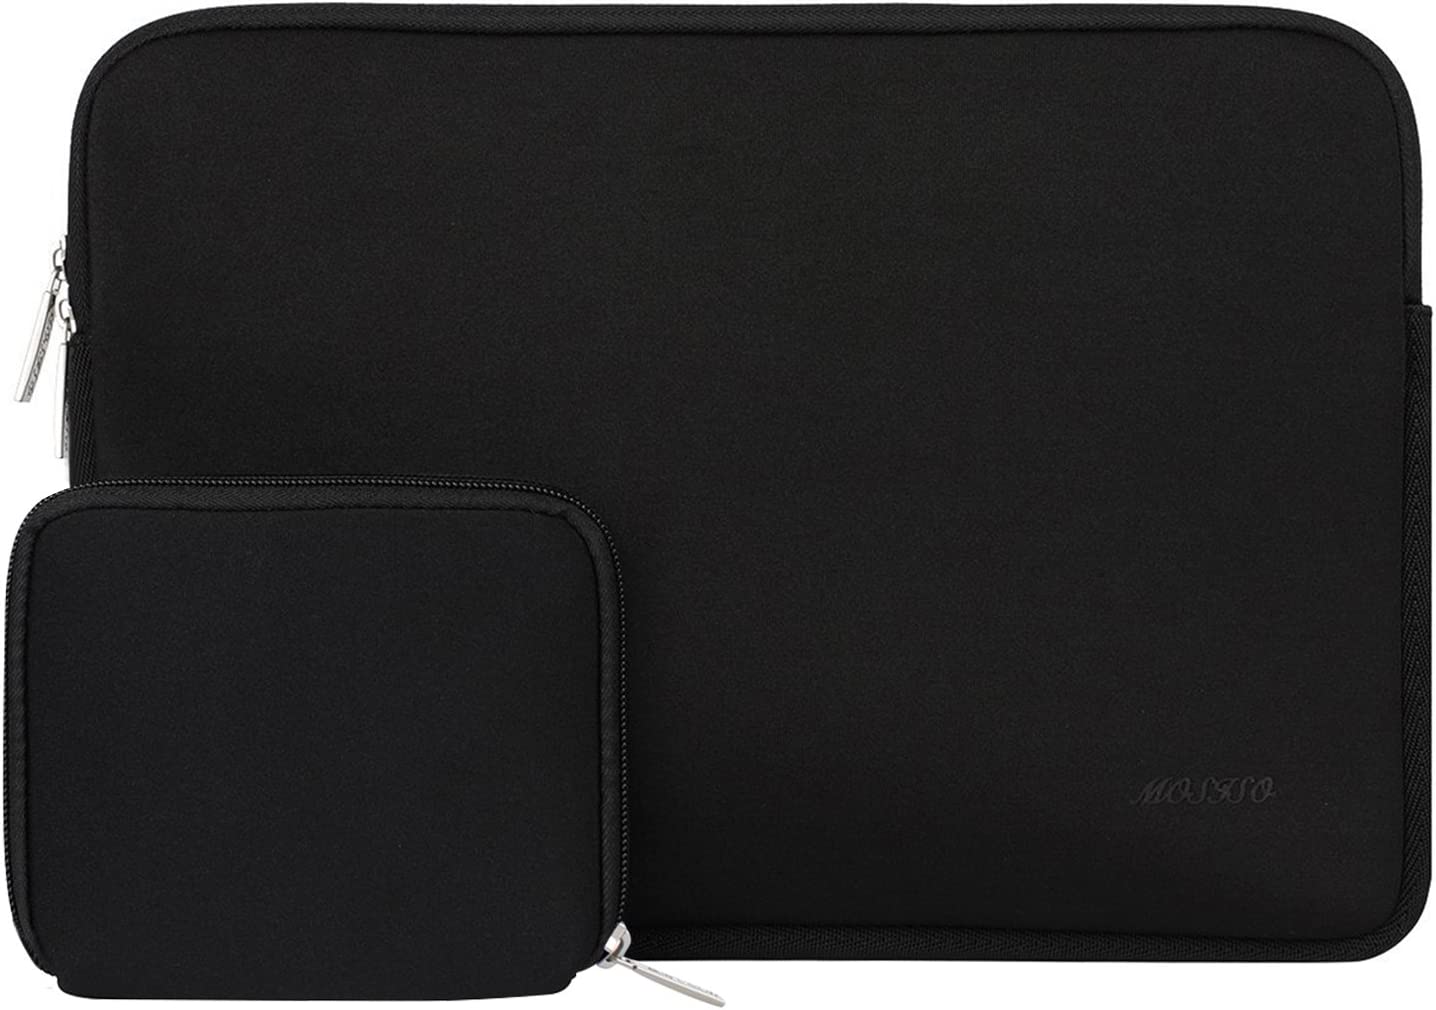 MOSISO Laptop Sleeve Compatible with MacBook Air/Pro, [...]